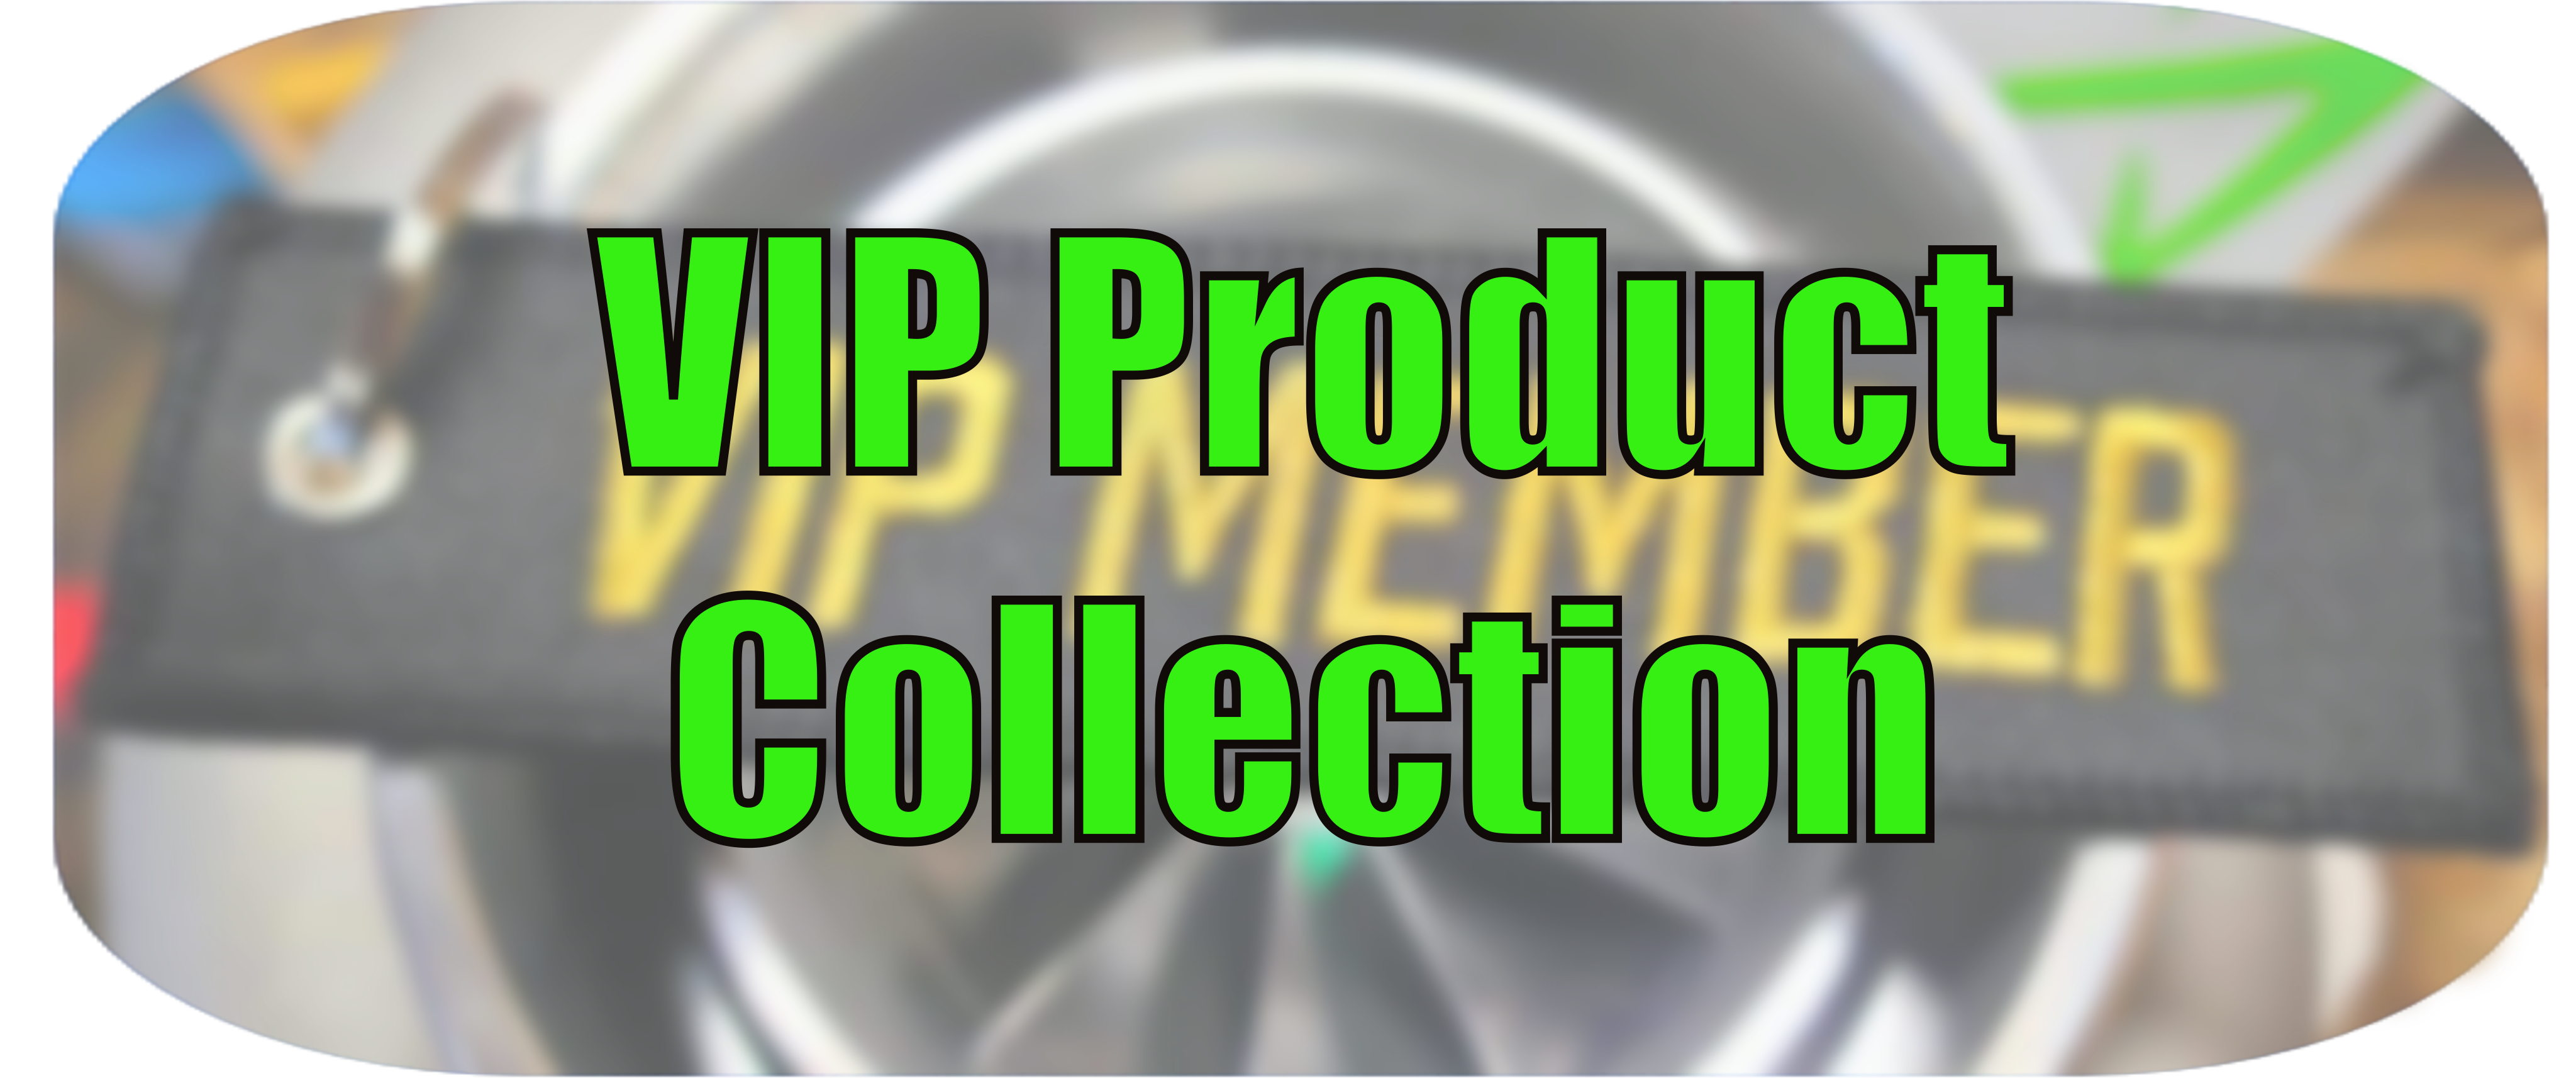 VIP Product Collection